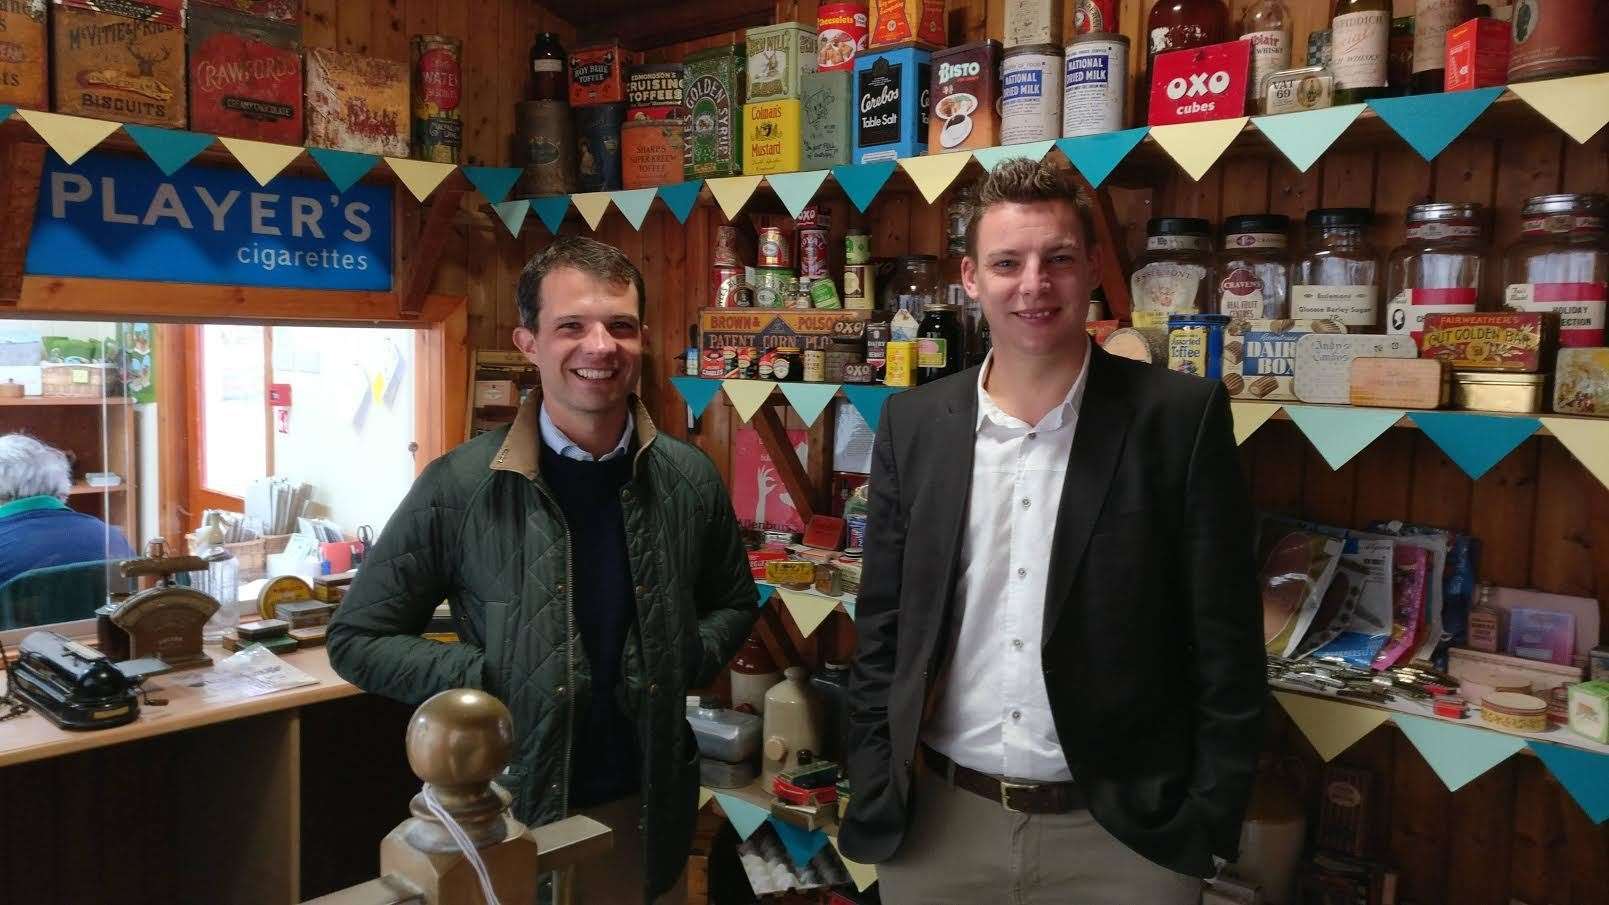 MP Andrew Bowie and councillor Rob Withey visiting the museum last year.